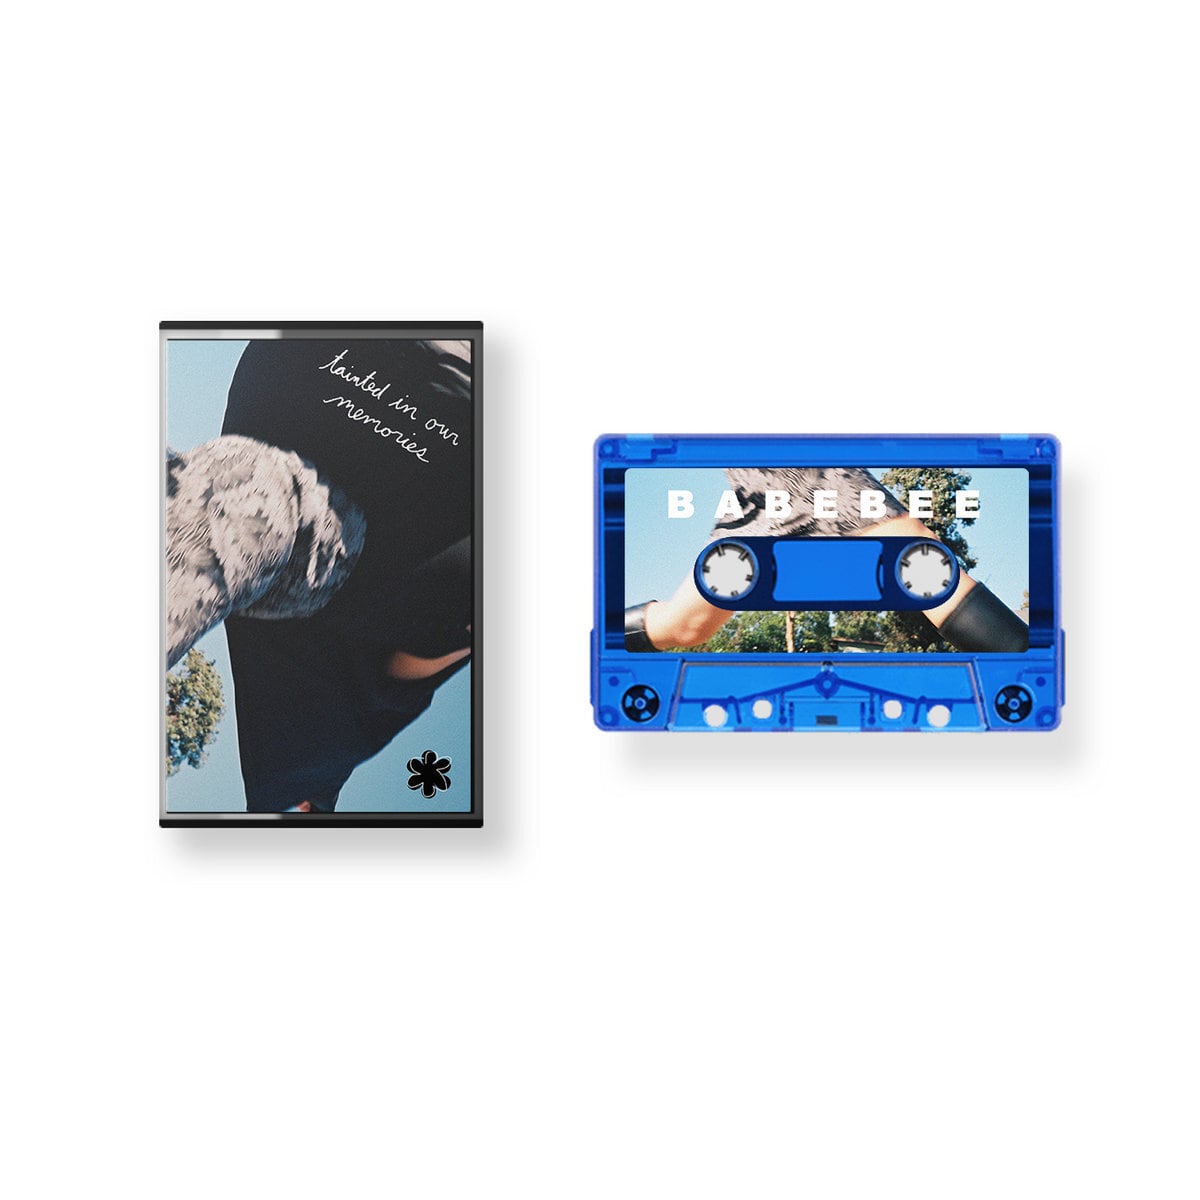 Babebee / tainted in our memories（100 Ltd Cassette）